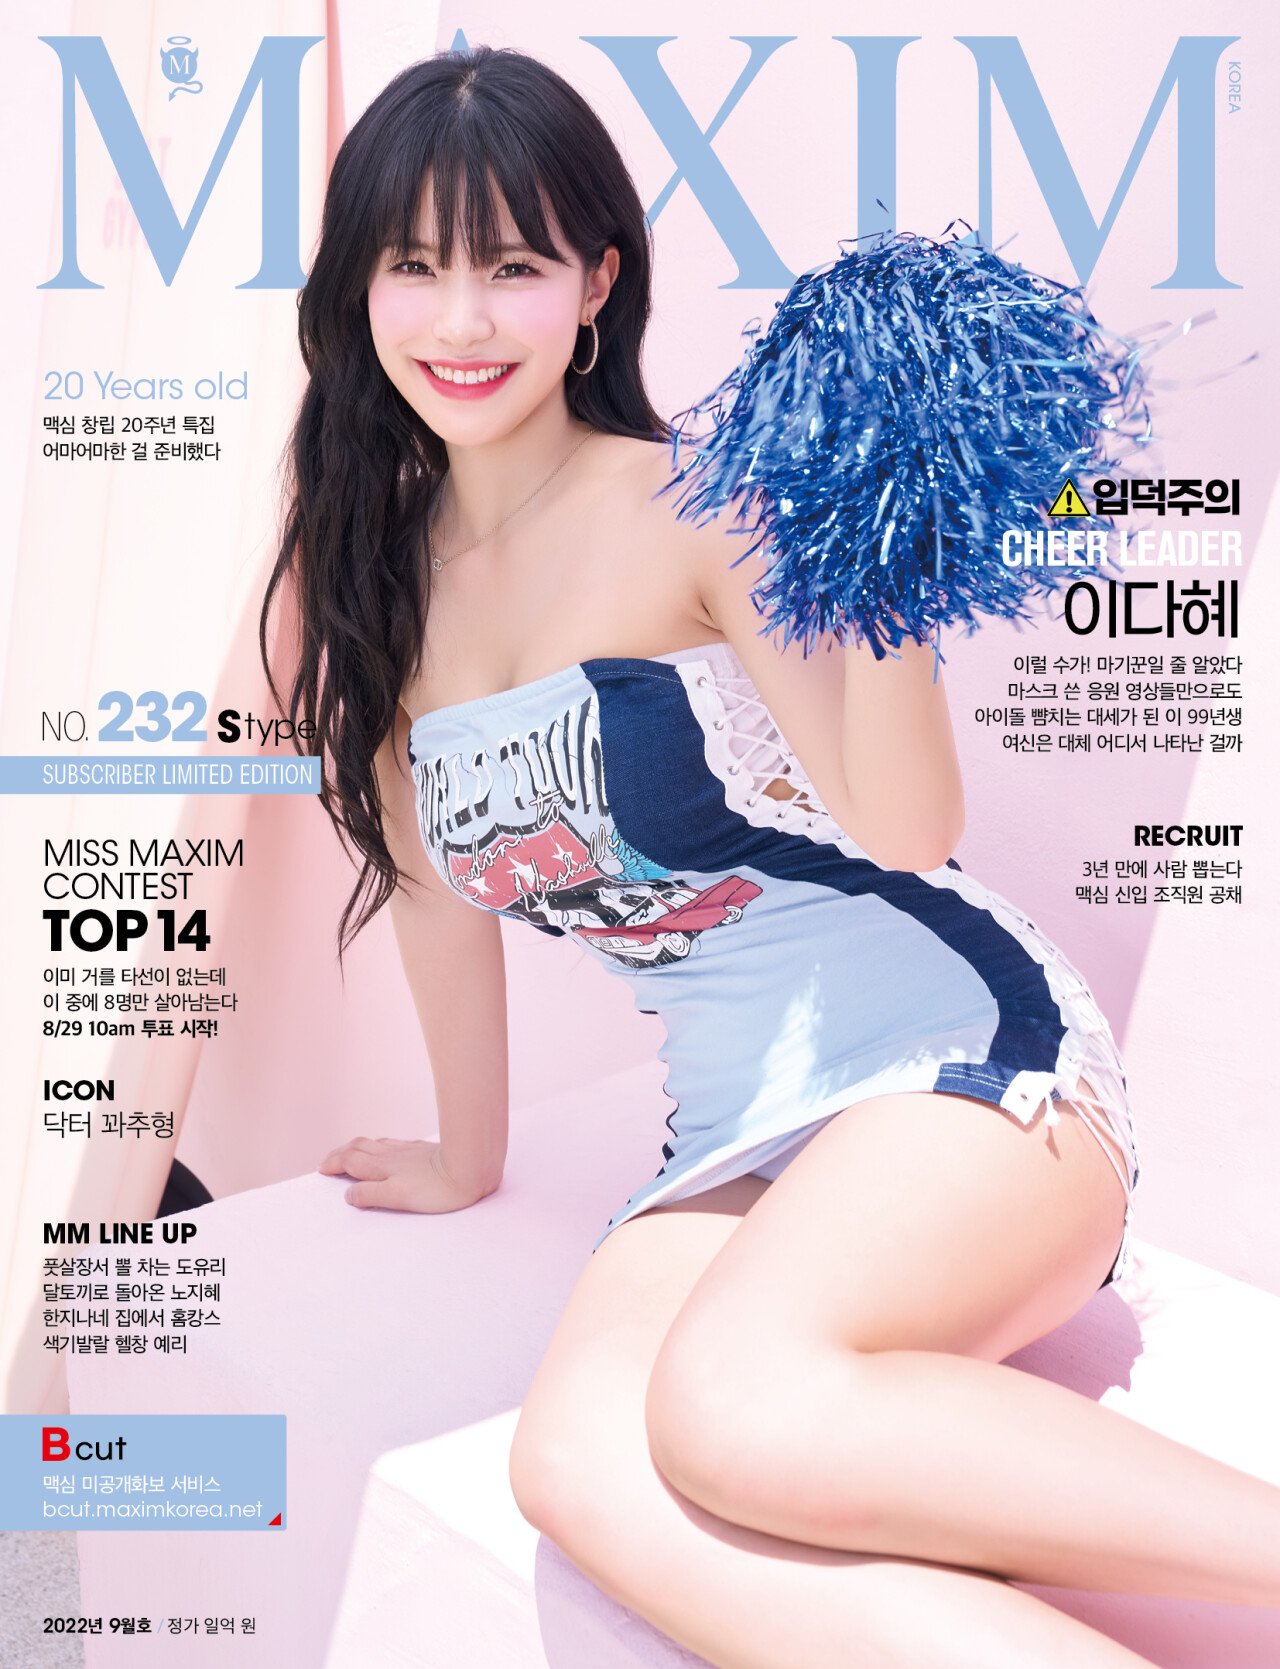 Two versions of cheerleader Lee Da-hye, who became the cover model for the September issue of Maxim